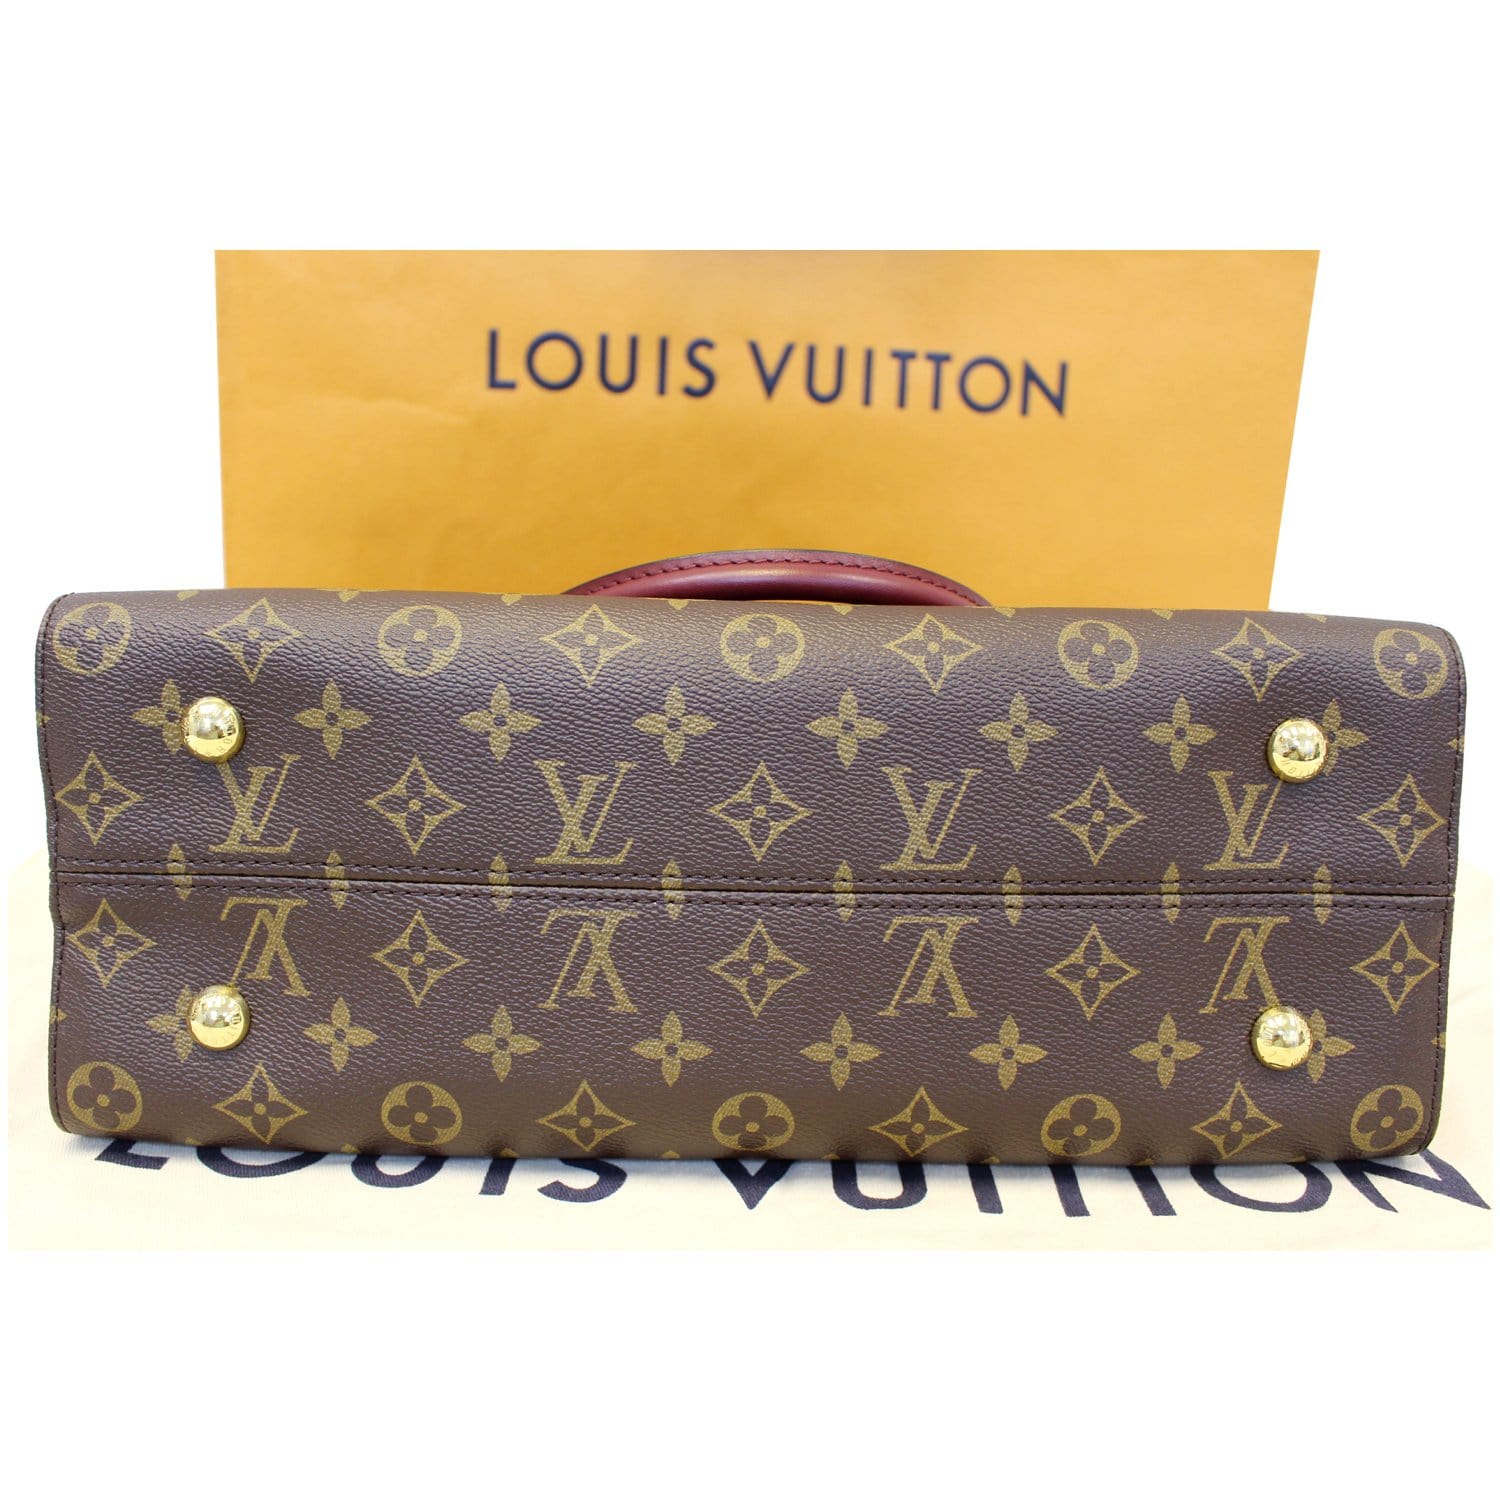 NOW AVAILABLE! Louis Vuitton - Tuileries by Jeanett's